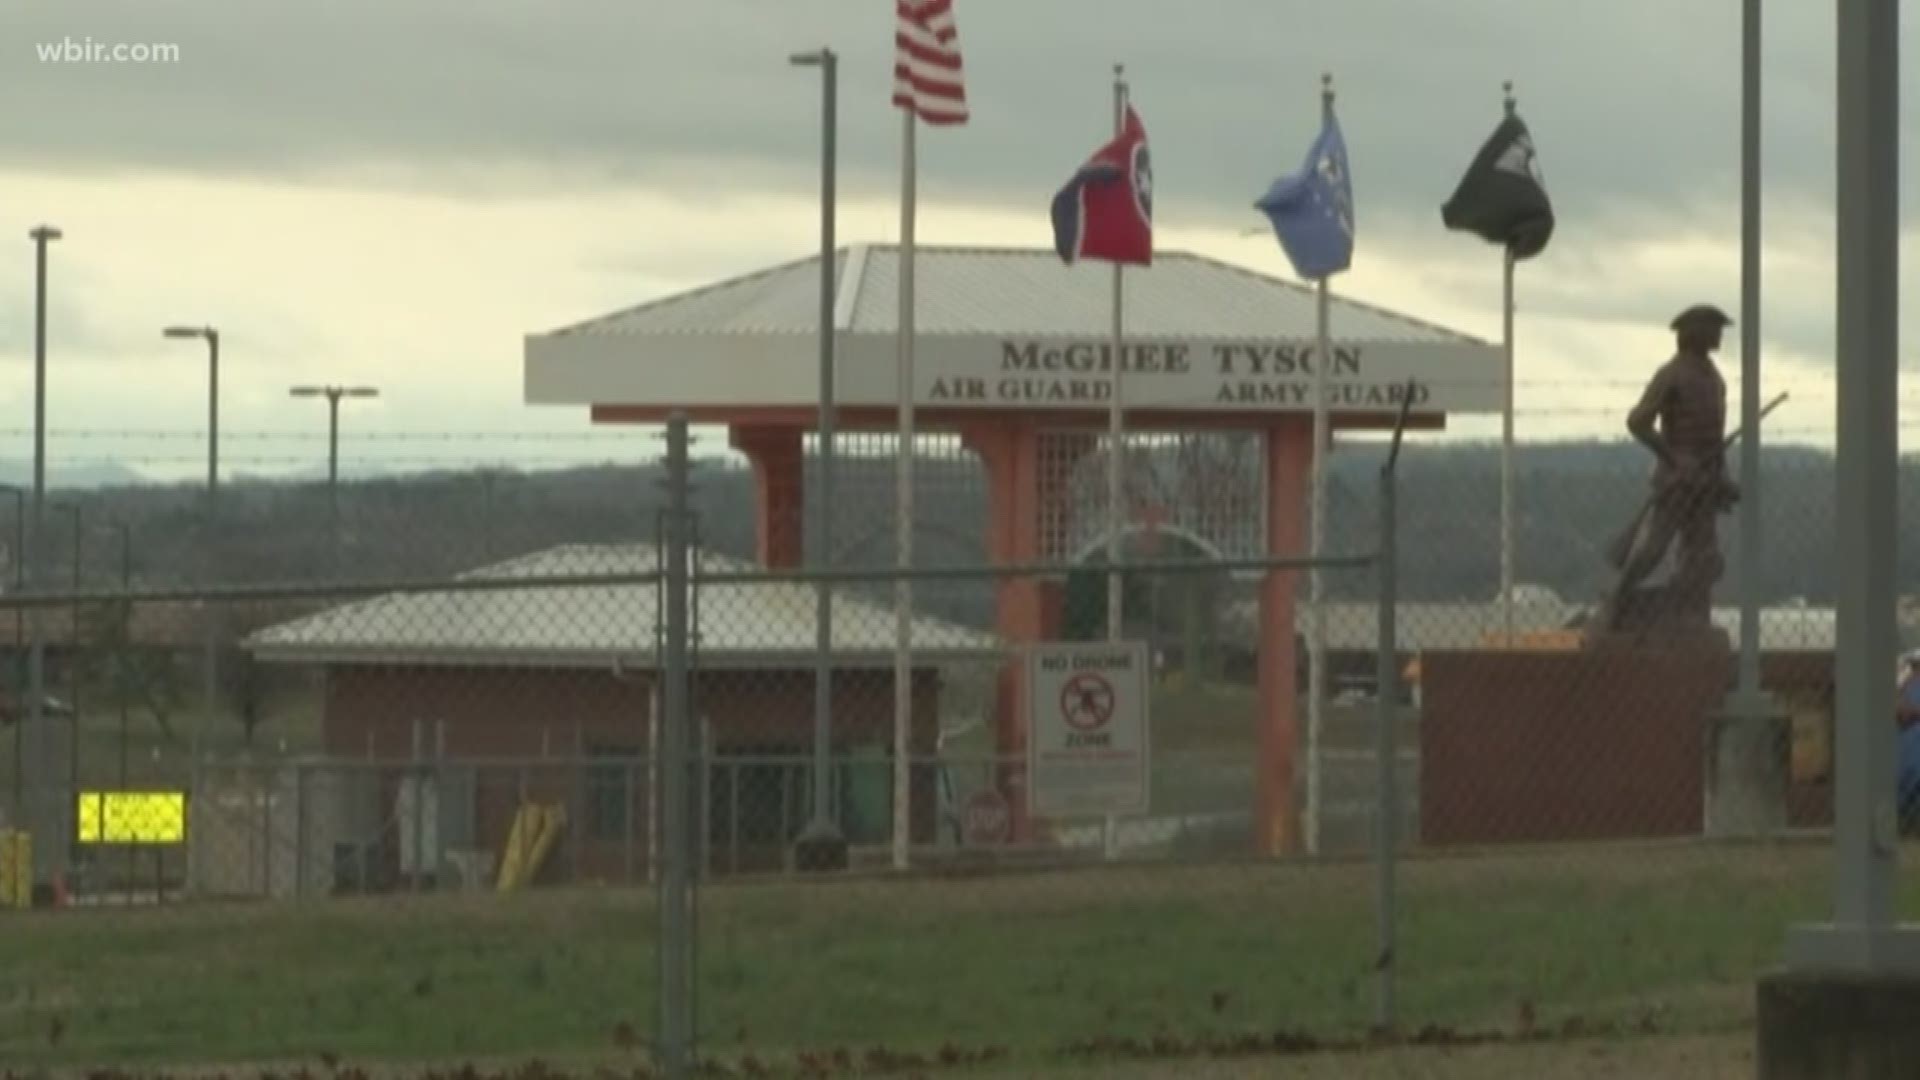 A report of a suspicious individual on McGhee Tyson's Air National Guard base prompted a lockdown Wednesday. We talk to Lieutenant Colonel Travis Hurst for an update